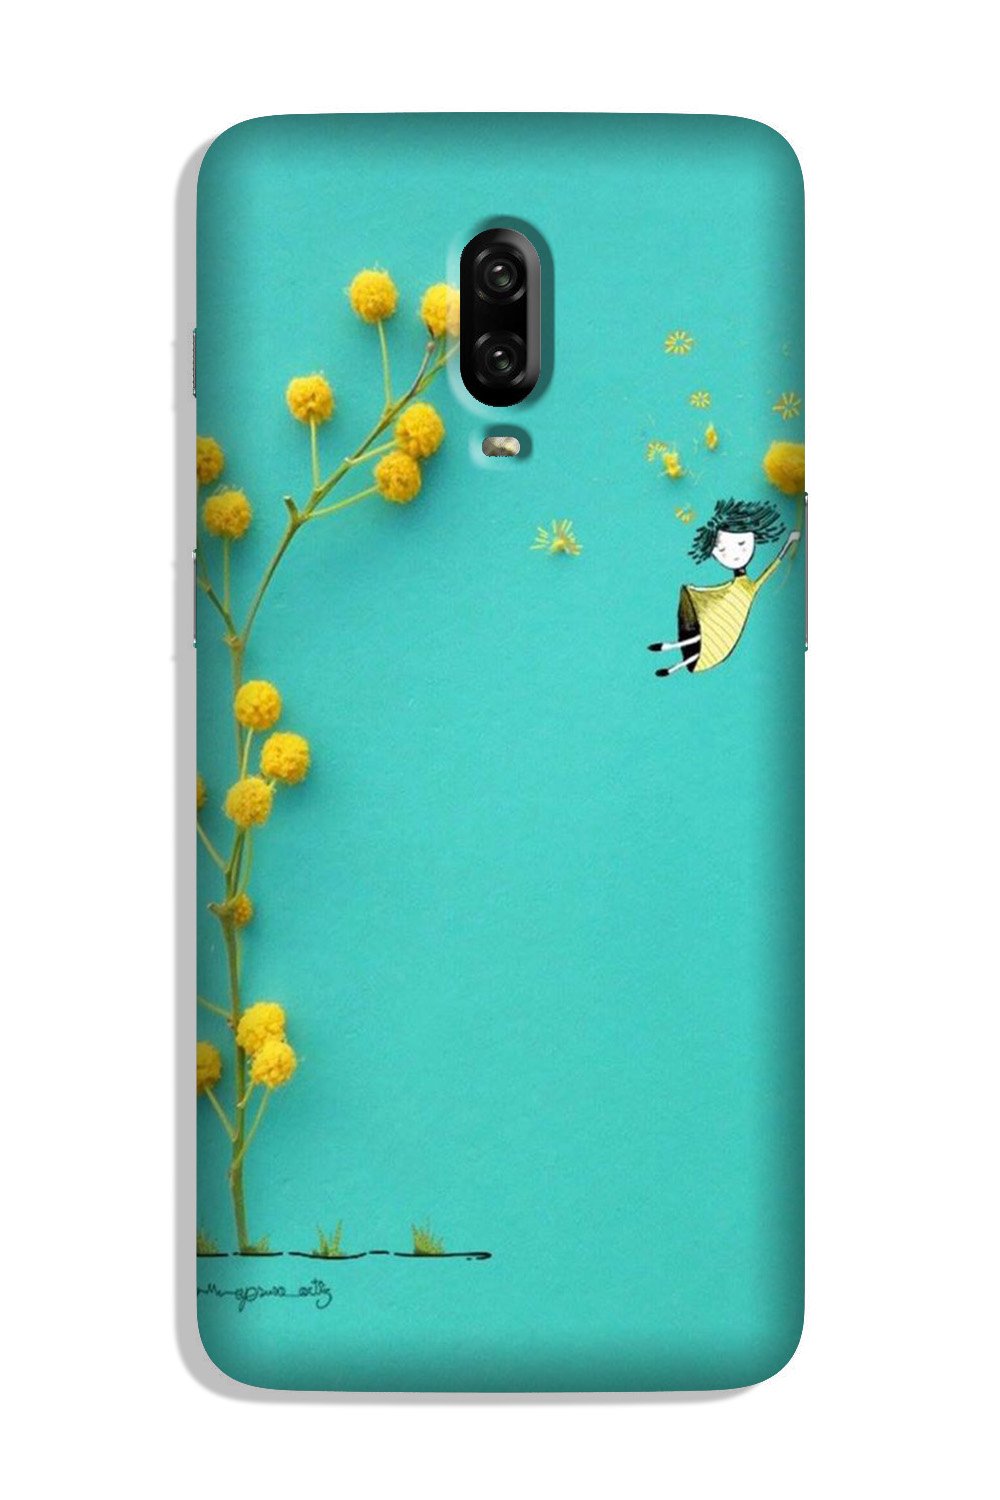 Flowers Girl Case for OnePlus 6T (Design No. 216)